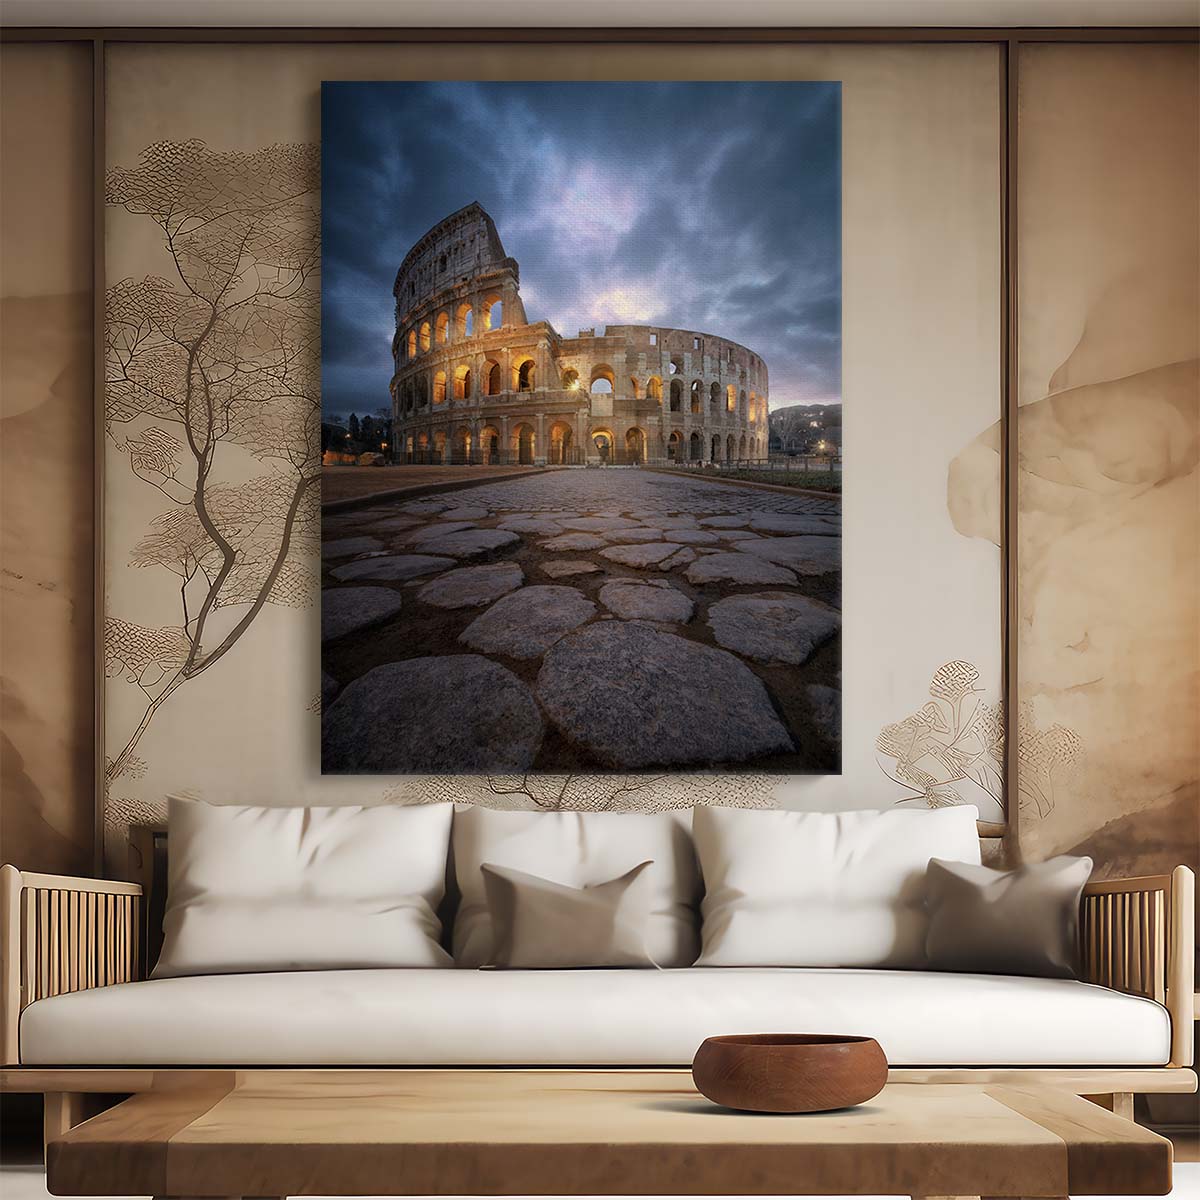 Colosseum Rome Night Photography Iconic Ancient Italian Landmark by Luxuriance Designs, made in USA